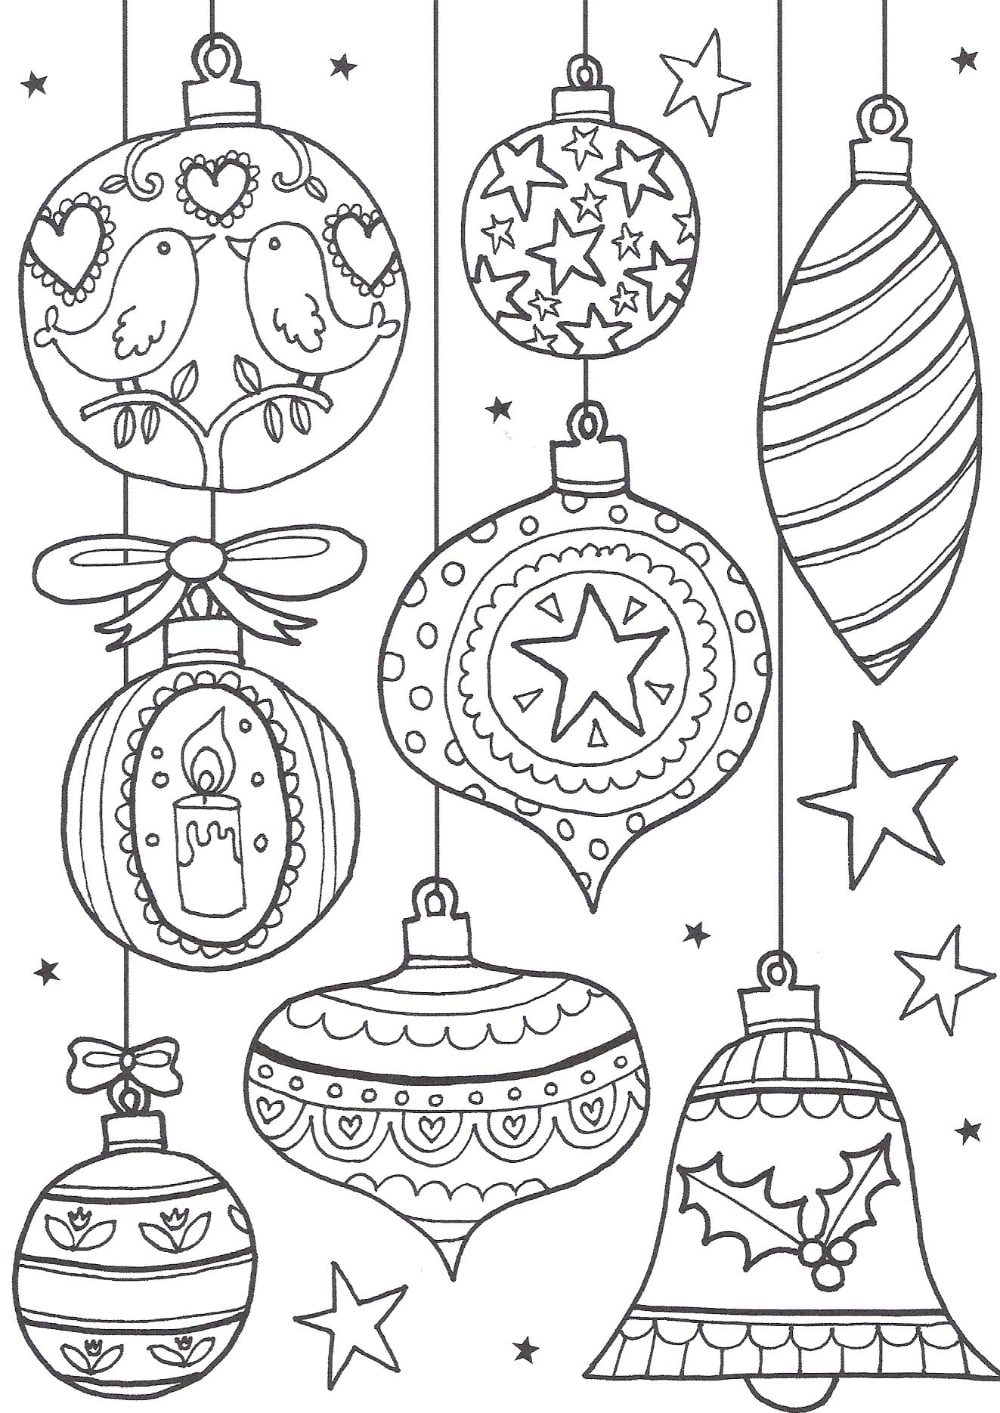 Printable Christmas Coloring Pages Free_18692